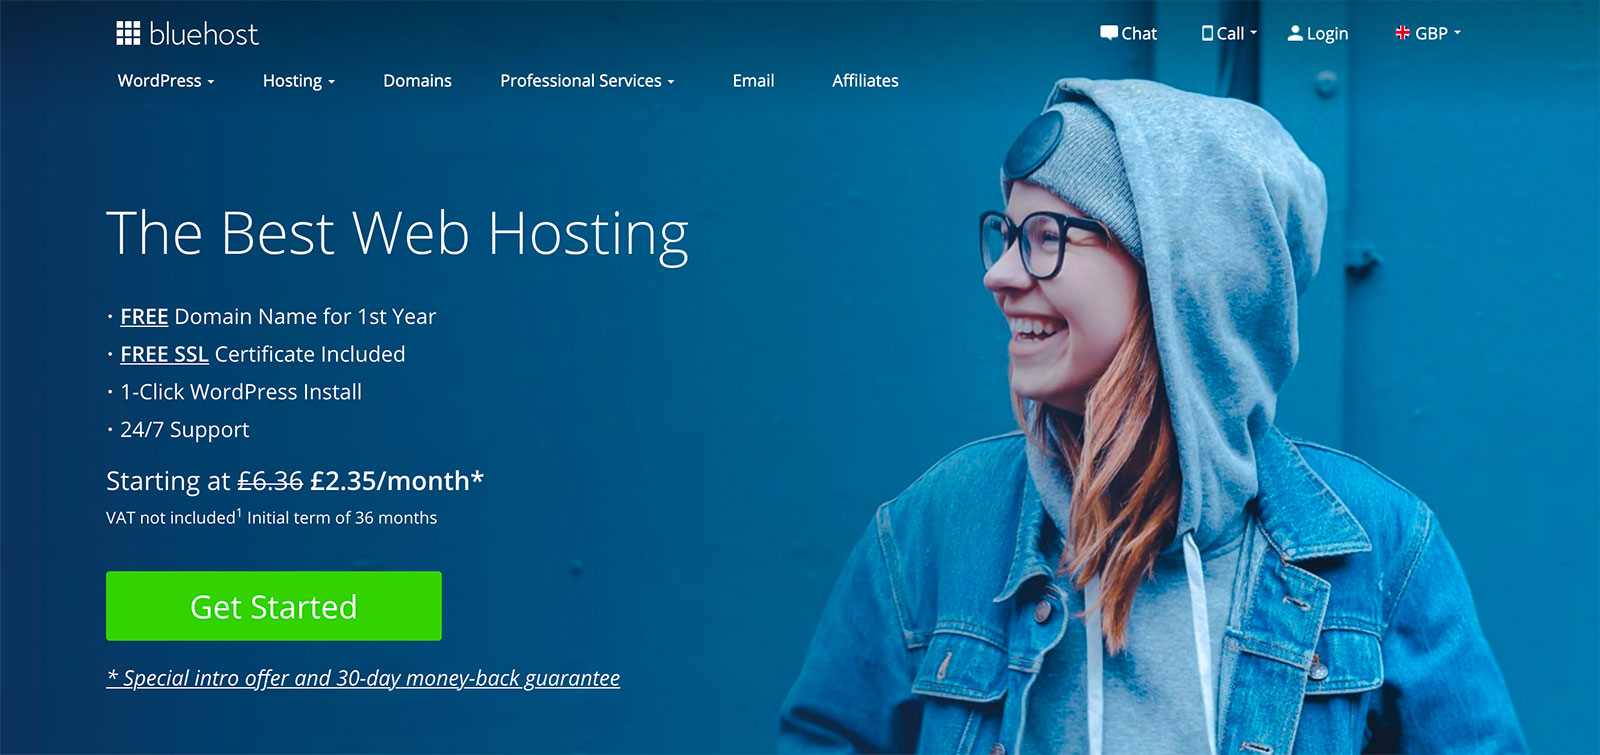 Bluehost Homepage